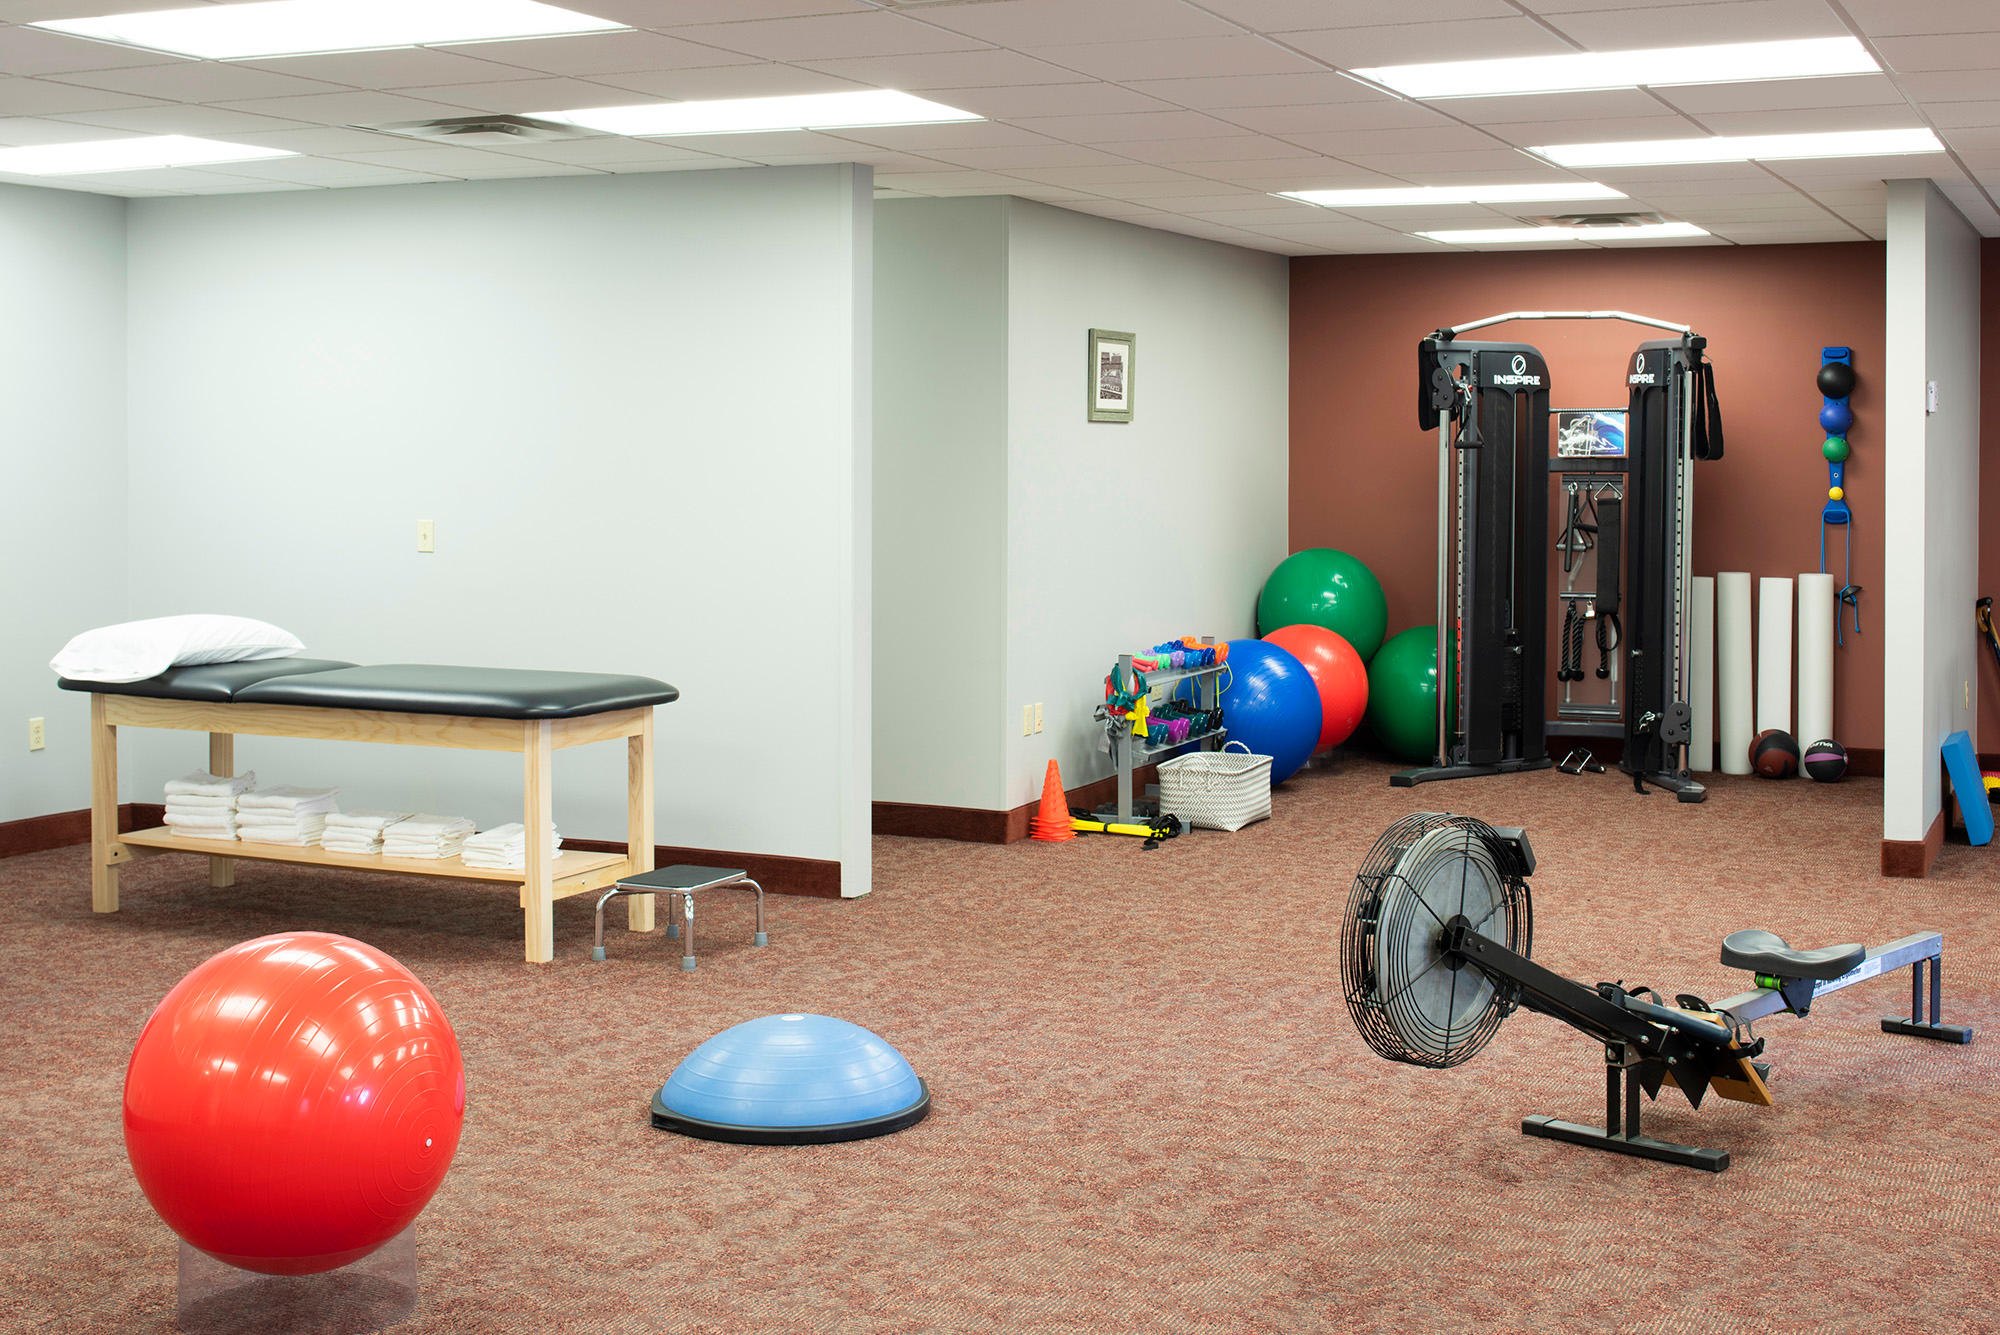 Bedford Fitness offers physical therapy, personal training, and massage—all in one location. We’re your go-to source for overall health and wellness.

Are you recovering from surgery or an injury? We can get you back in tip-top shape. Is your goal weight loss? We can help you shed pounds. Are you training for a marathon? We can help build your stamina and give you a competitive edge. Do you want to achieve a healthier lifestyle? We can help with that, too.

Our physical therapist works with you one-on-one to customize programs for post-surgical therapy, chronic pain management, and sports-related injury rehab. And our personal trainer offers transition programs that bridge the gap for those who want to continue getting stronger and more fit after they have completed physical therapy. We are also the place for athletes looking to train for a race or improve their body mechanics for golf—as well as anyone who wants to get stronger and boost their energy.

Innovative services like trigger-point dry needling, running evaluations, Thai massage therapy, and glide disc sliding group fitness can help improve your health. 
In addition to personal fitness training, our exercise facility hosts small group fitness classes tailored to senior fitness, pre-natal and post-natal fitness, strength training, and preventative care. And if you like to work out at home, we can personalize exercise demo videos for online personal training.